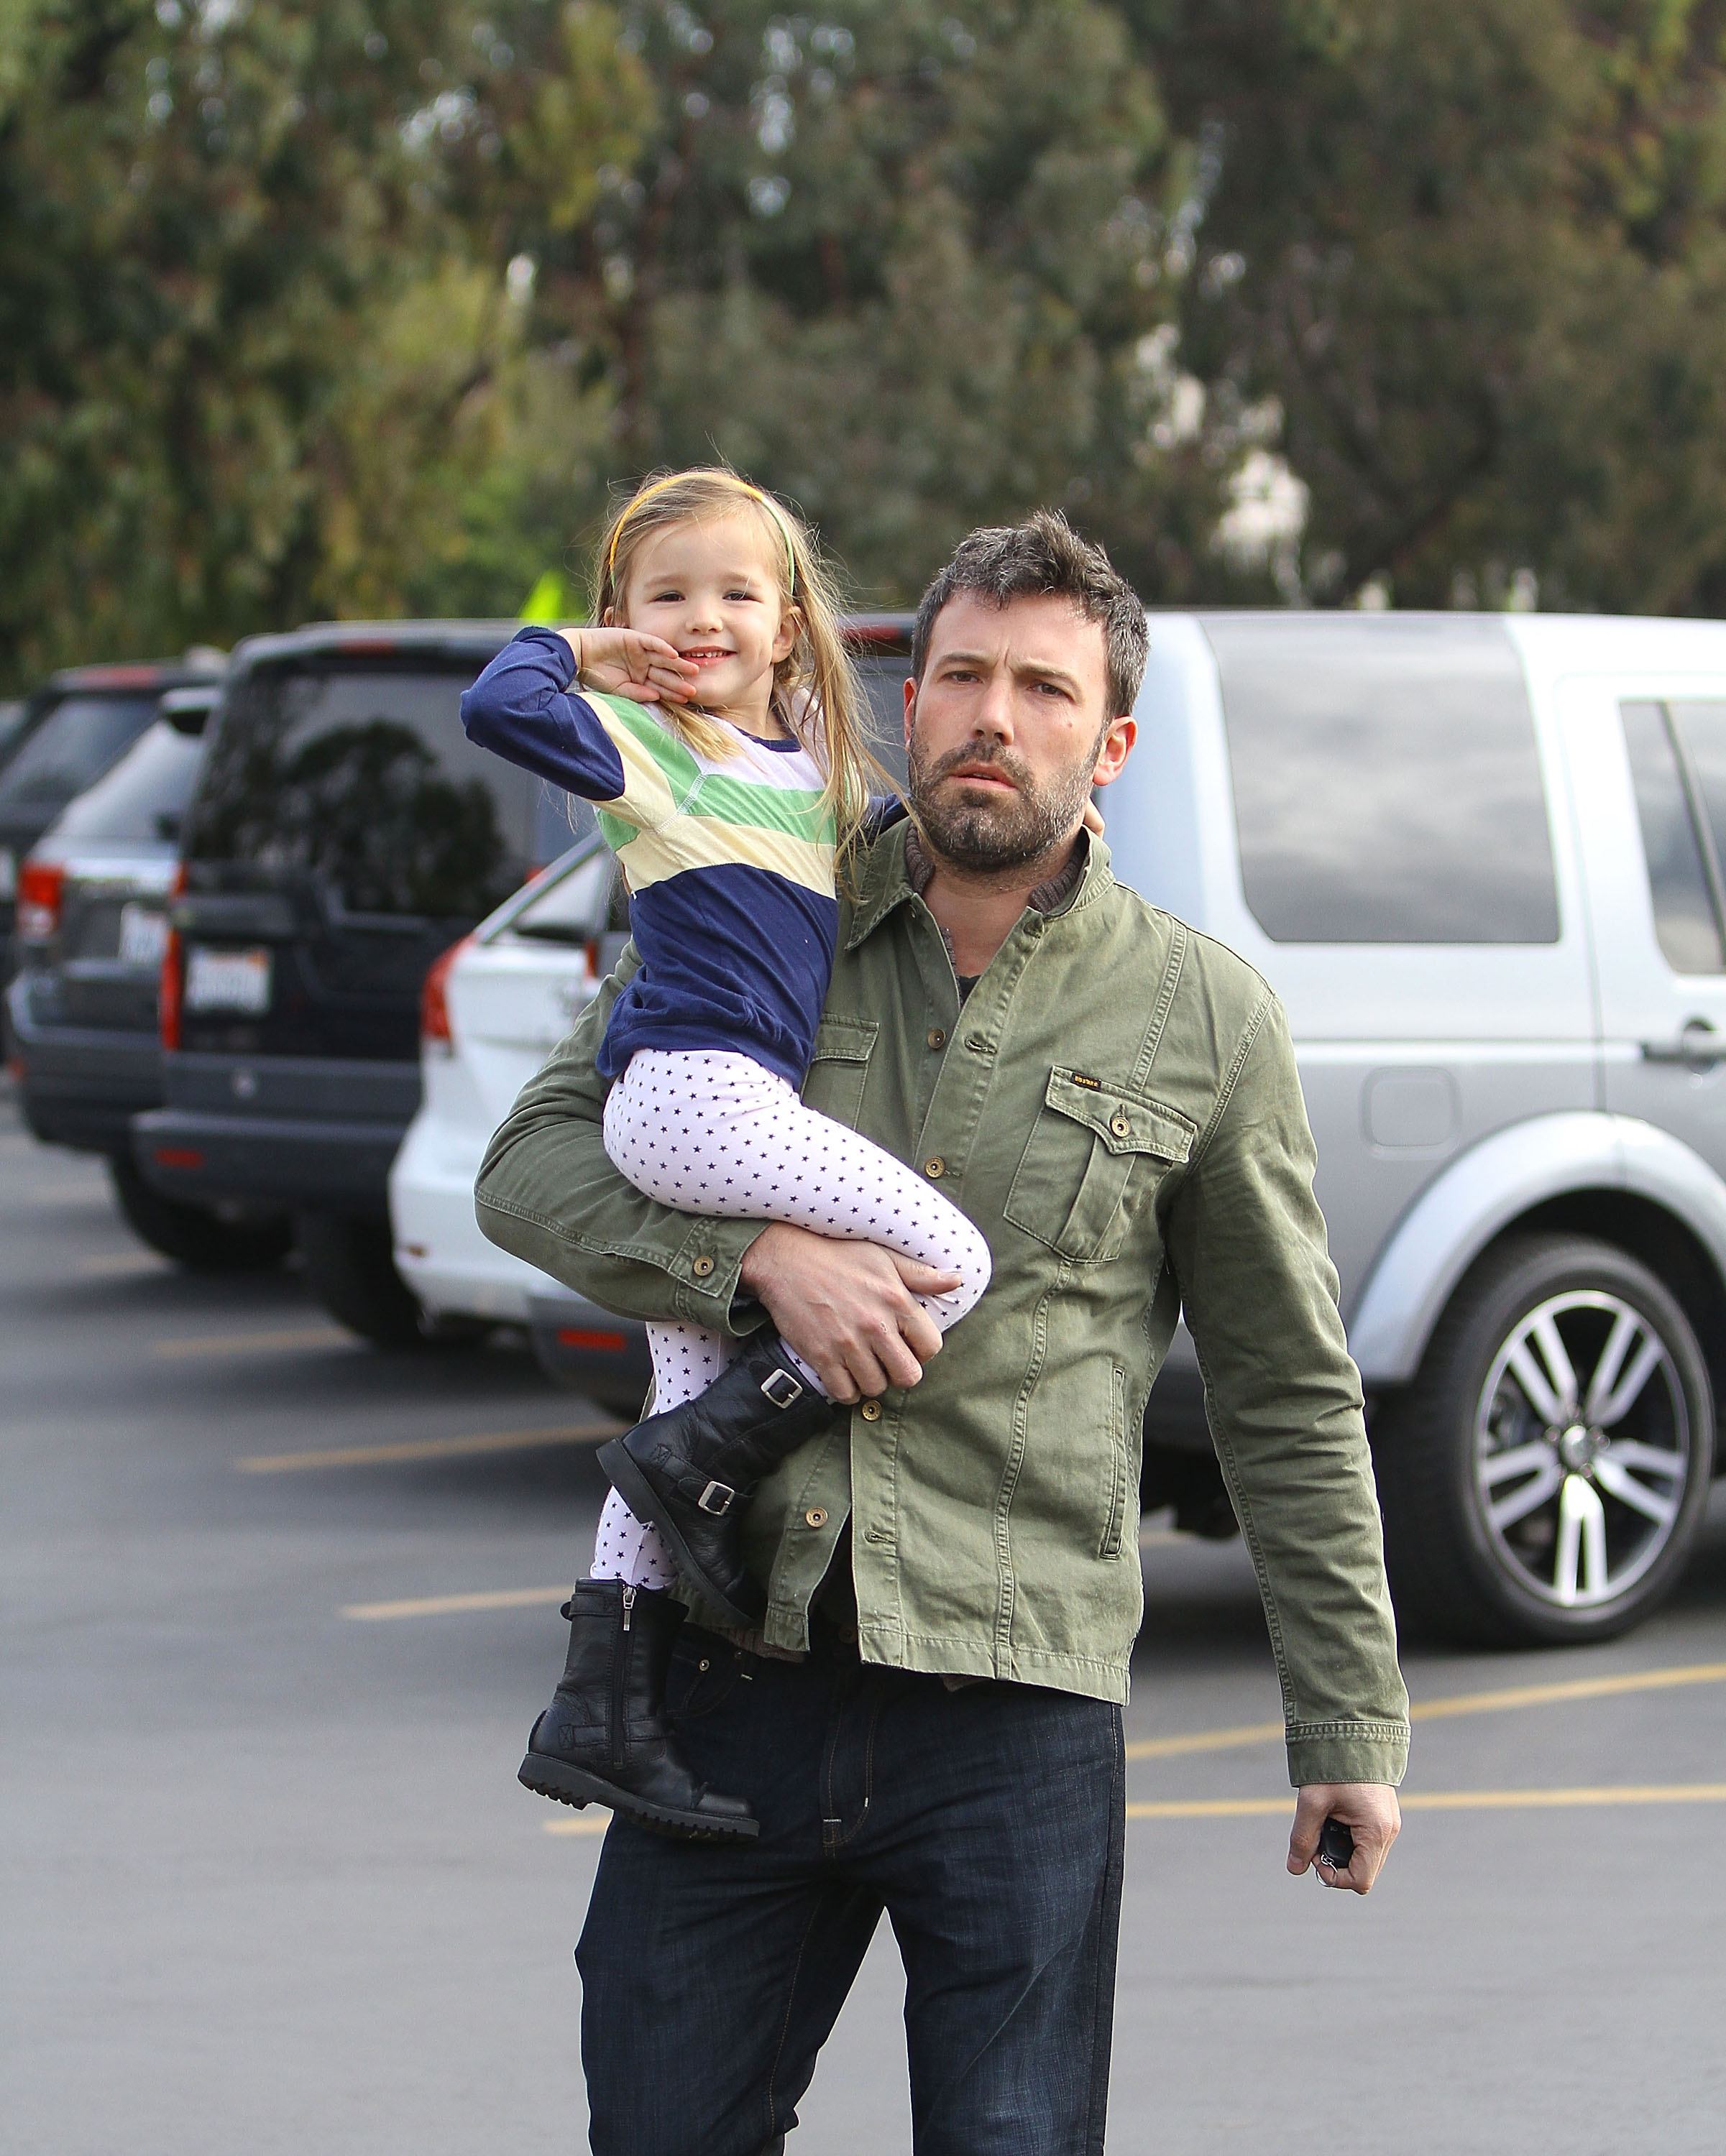 Ben Affleck and his daughter Seraphina Affleck are seen in Brentwood, on December 23, 2012, in Los Angeles, California. | Source: Getty Images